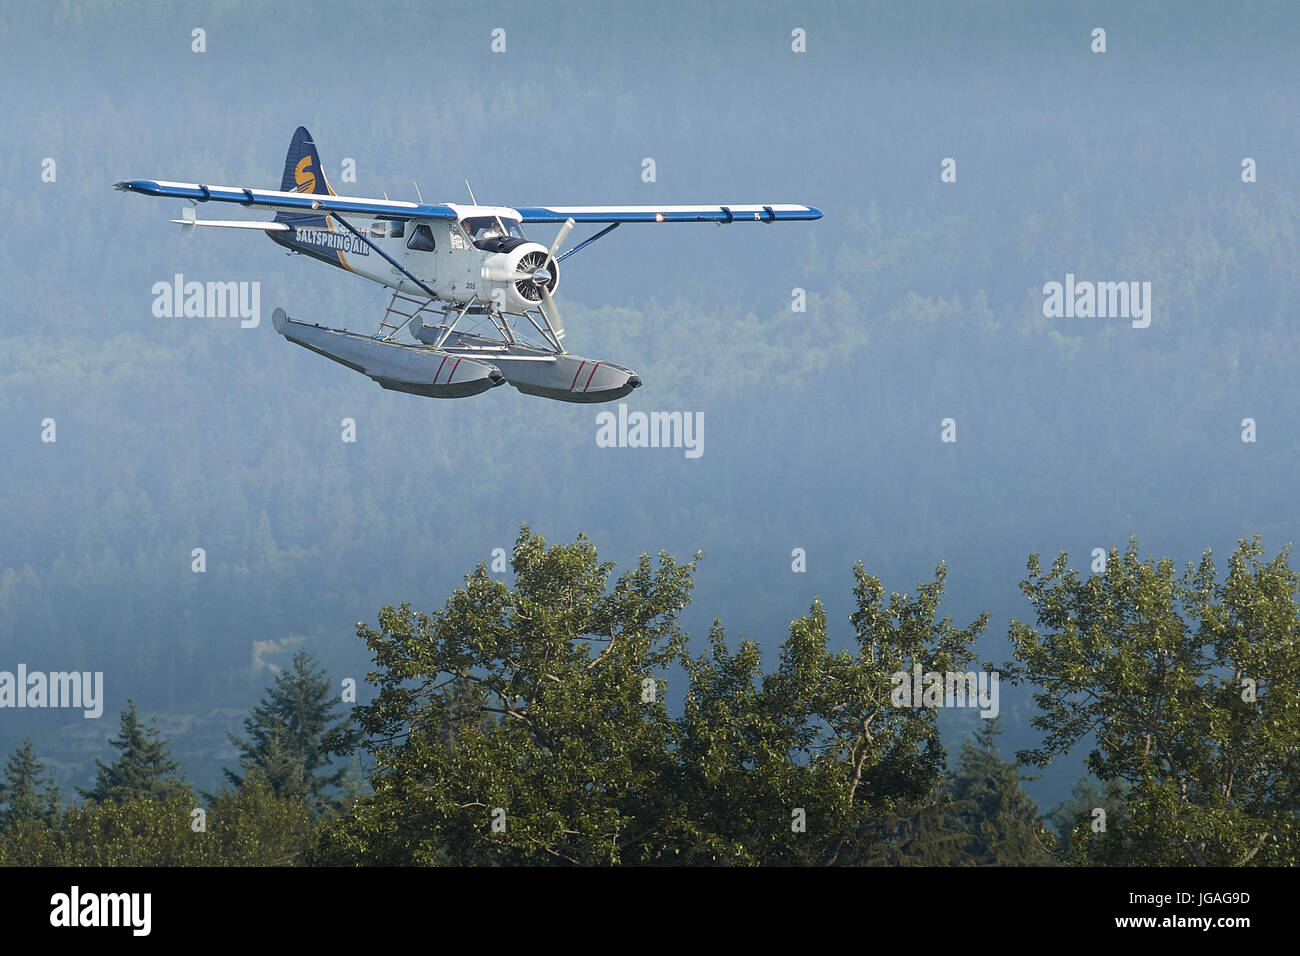 A Classic Harbour Air Seaplanes de Havilland DHC-2 Beaver Flying Low Over Forrest Woodlands In British Columbia, Canada. Stock Photo